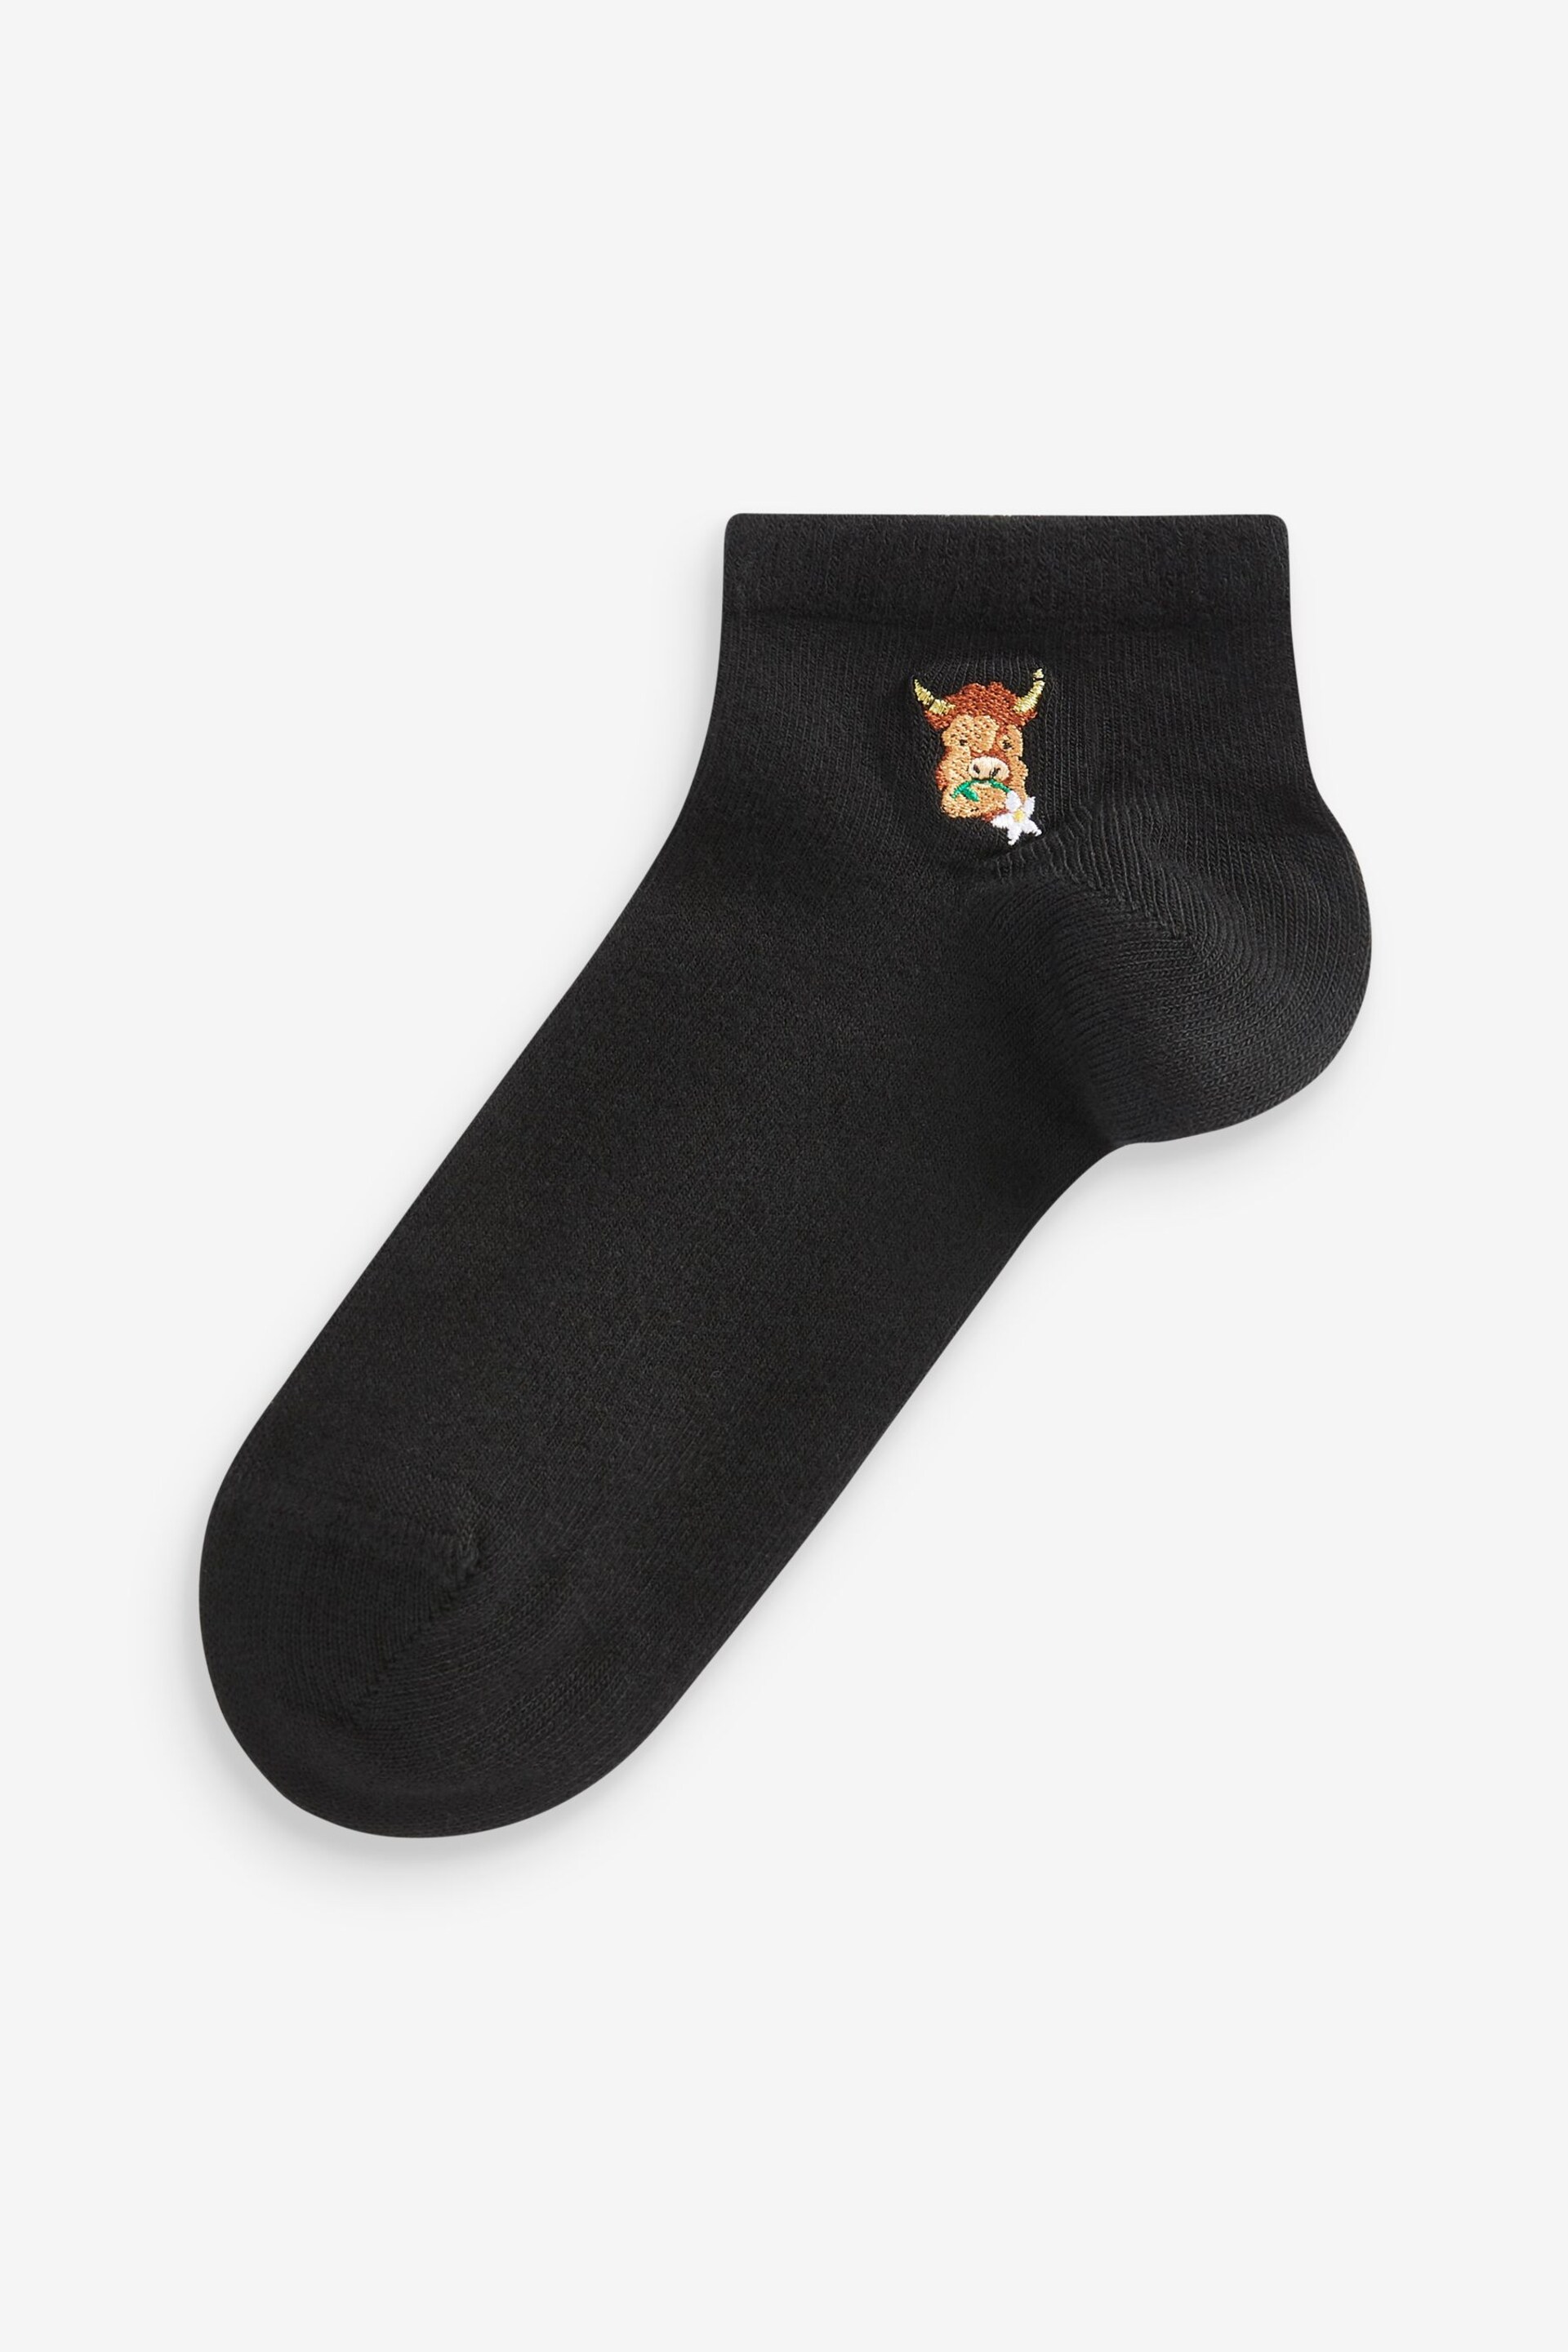 Black Embroidered Hamish The Highland Cow Motif Trainer Socks 4 Pack - Image 5 of 5